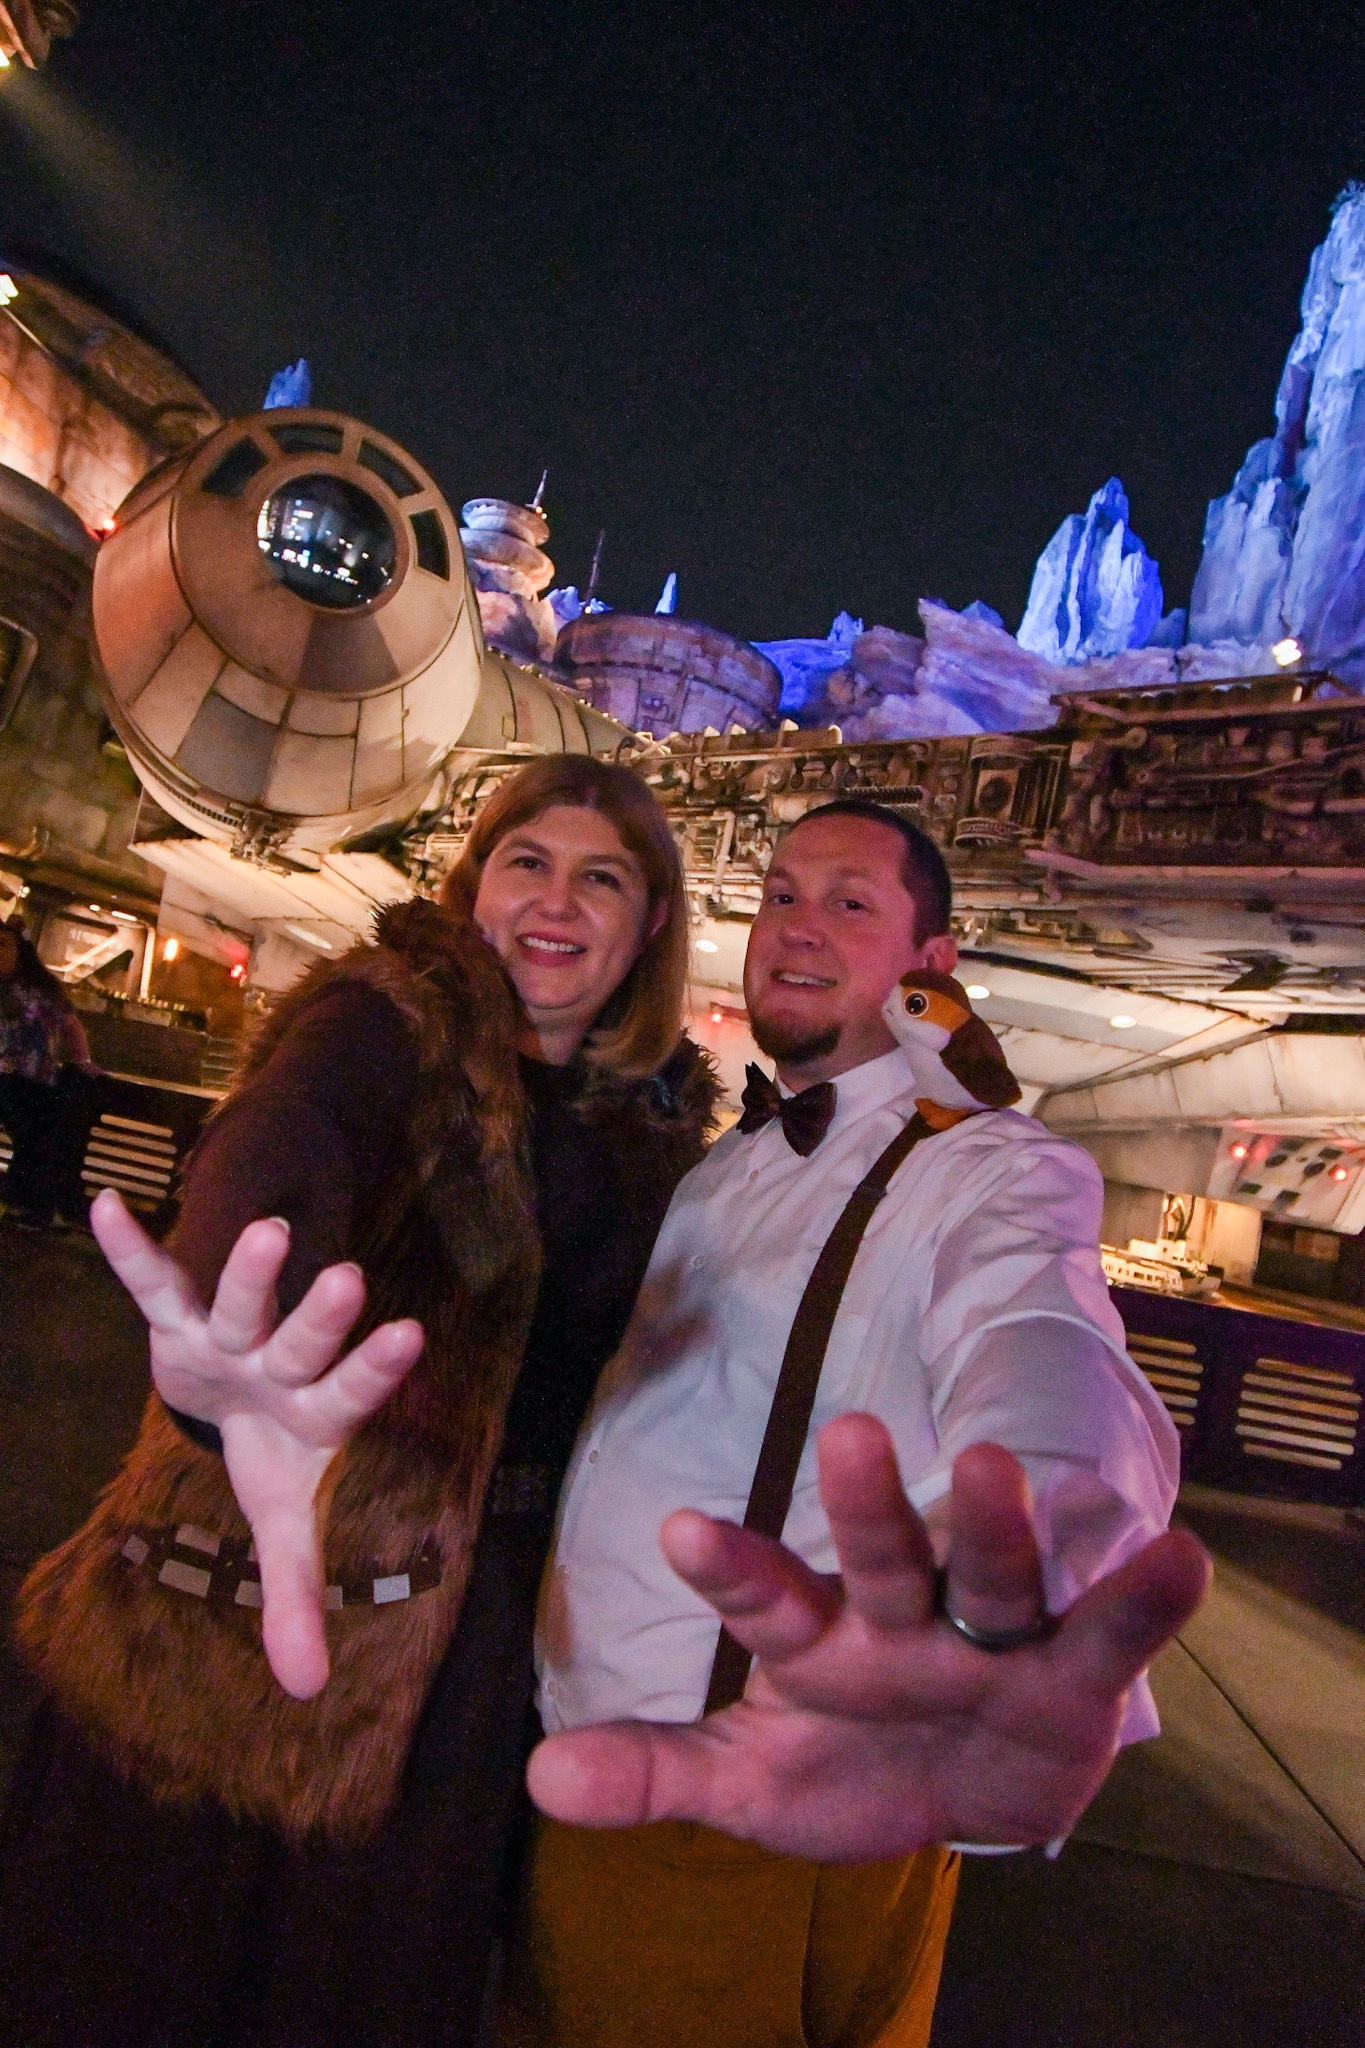 Stars Wars Night 2022: A Disney After Dark Special Event post thumbnail image